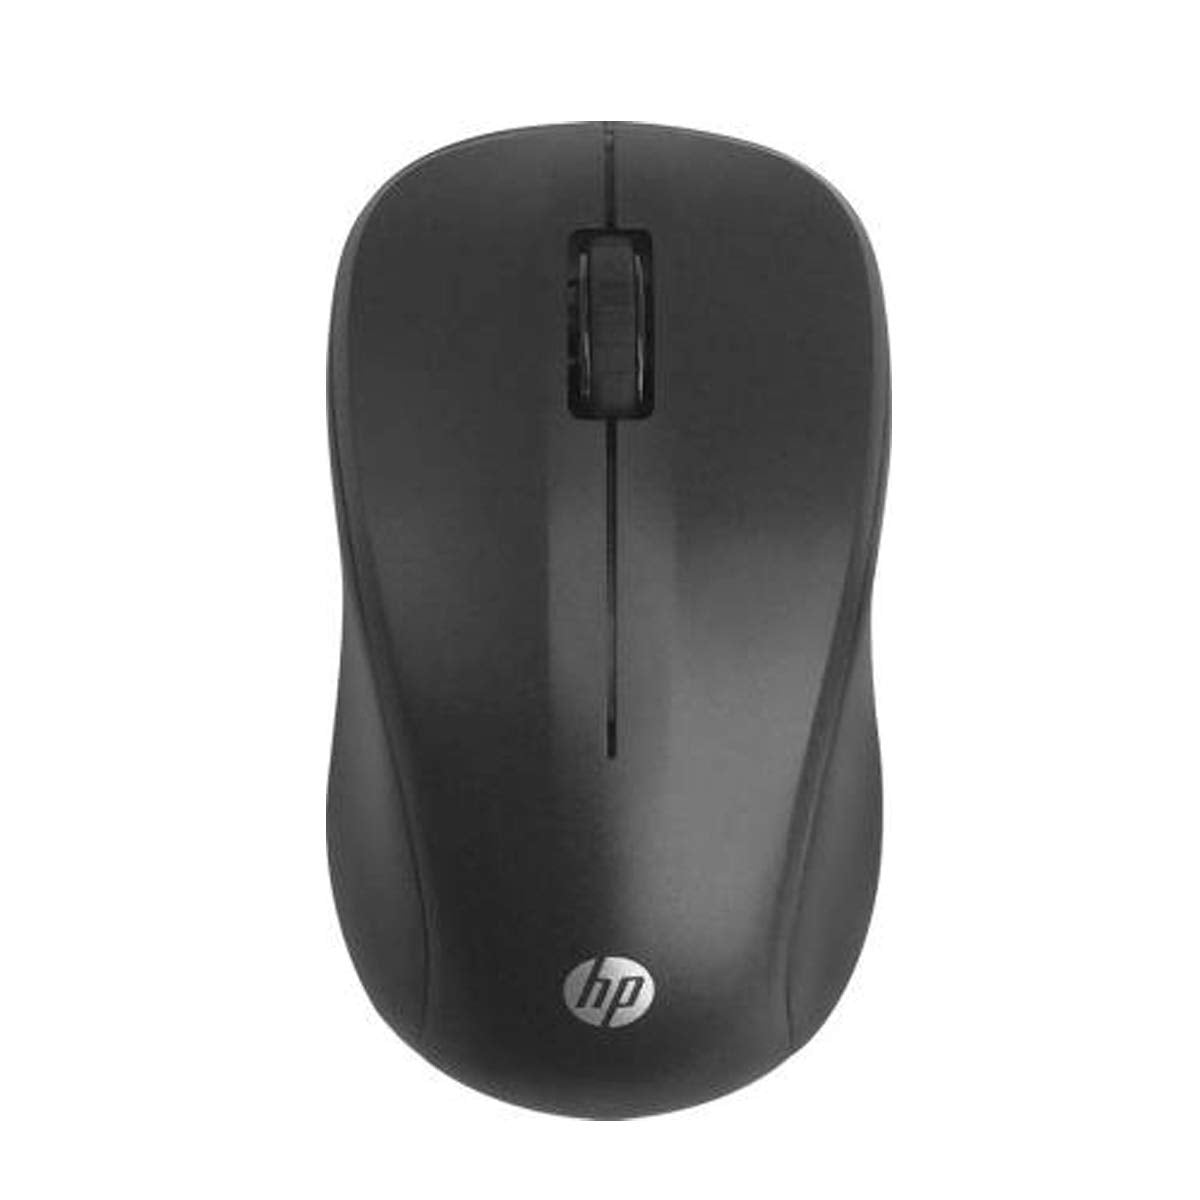 HP S500 Wireless Optical Mouse (2.4GHz Wireless, Black)